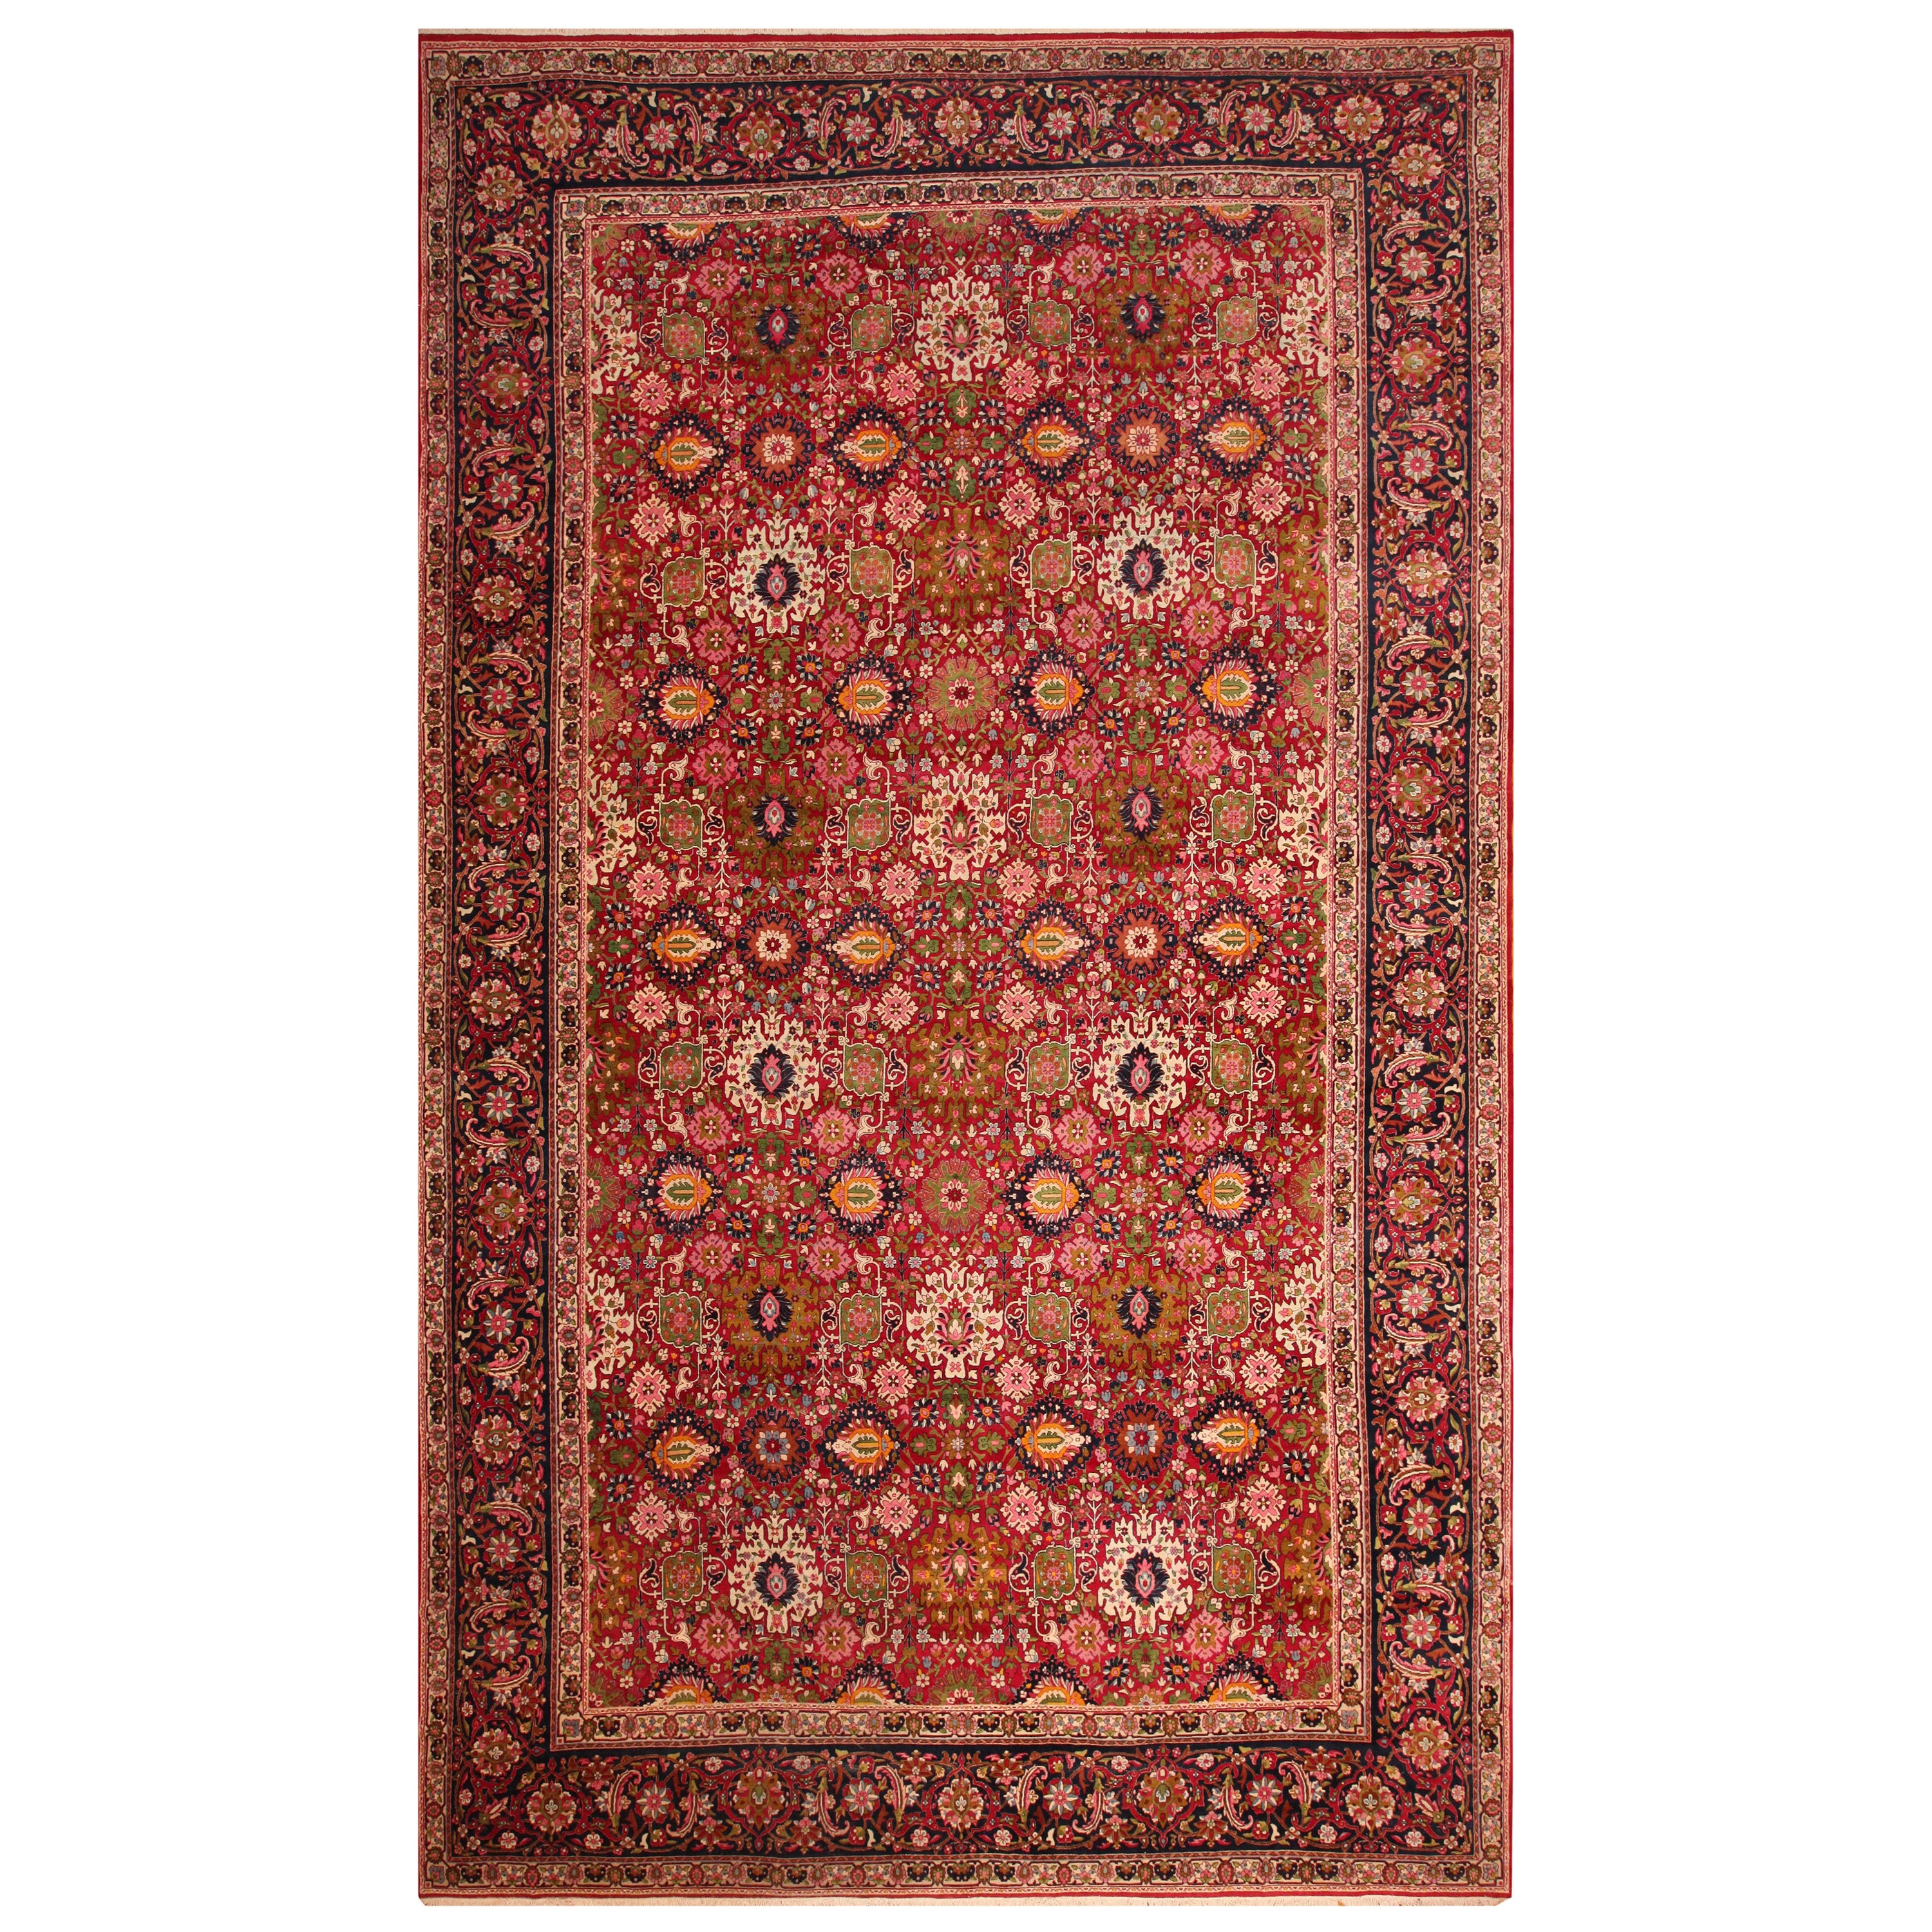 Large Antique Persian Kerman Rug. Size: 11 ft 10 in x 20 ft